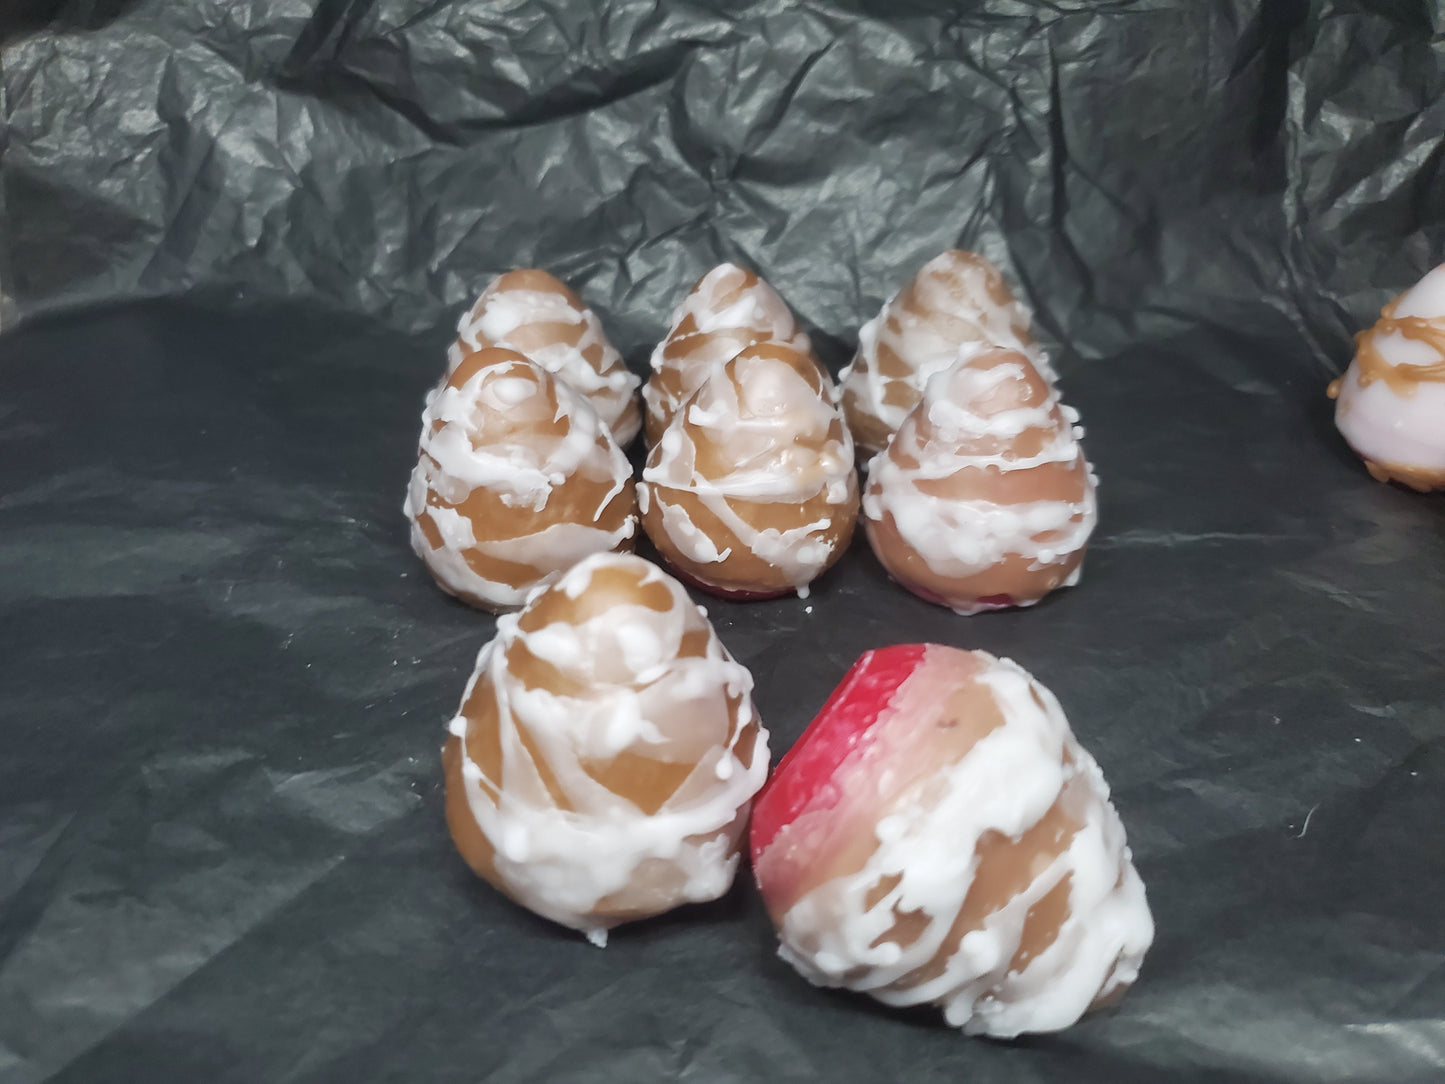 Milk Chocolate Dipped Stawberries with vinalla creme drizzle wax melts